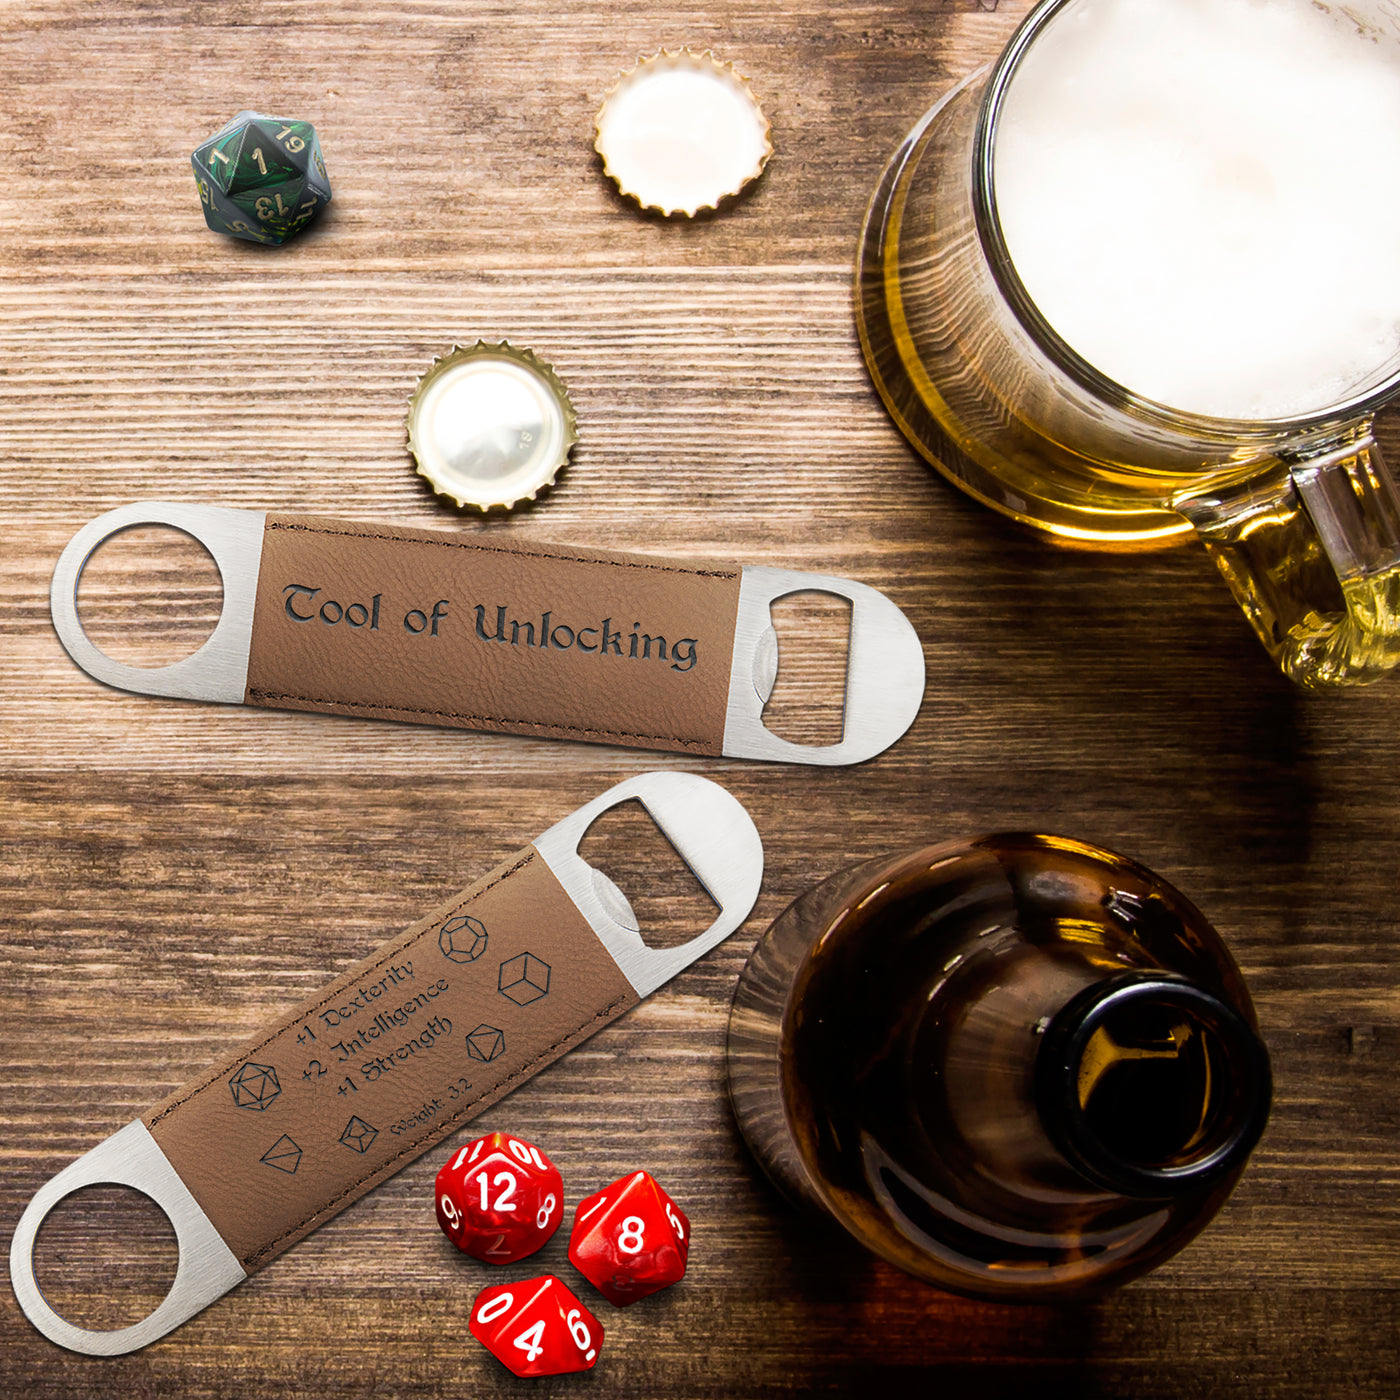 Dungeons and Dragons Tool of Unlocking Bottle Opener | DnD Gifts Men | DnD Accessories | Dungeon Master Gifts | DnD Stuff | D&D Gifts